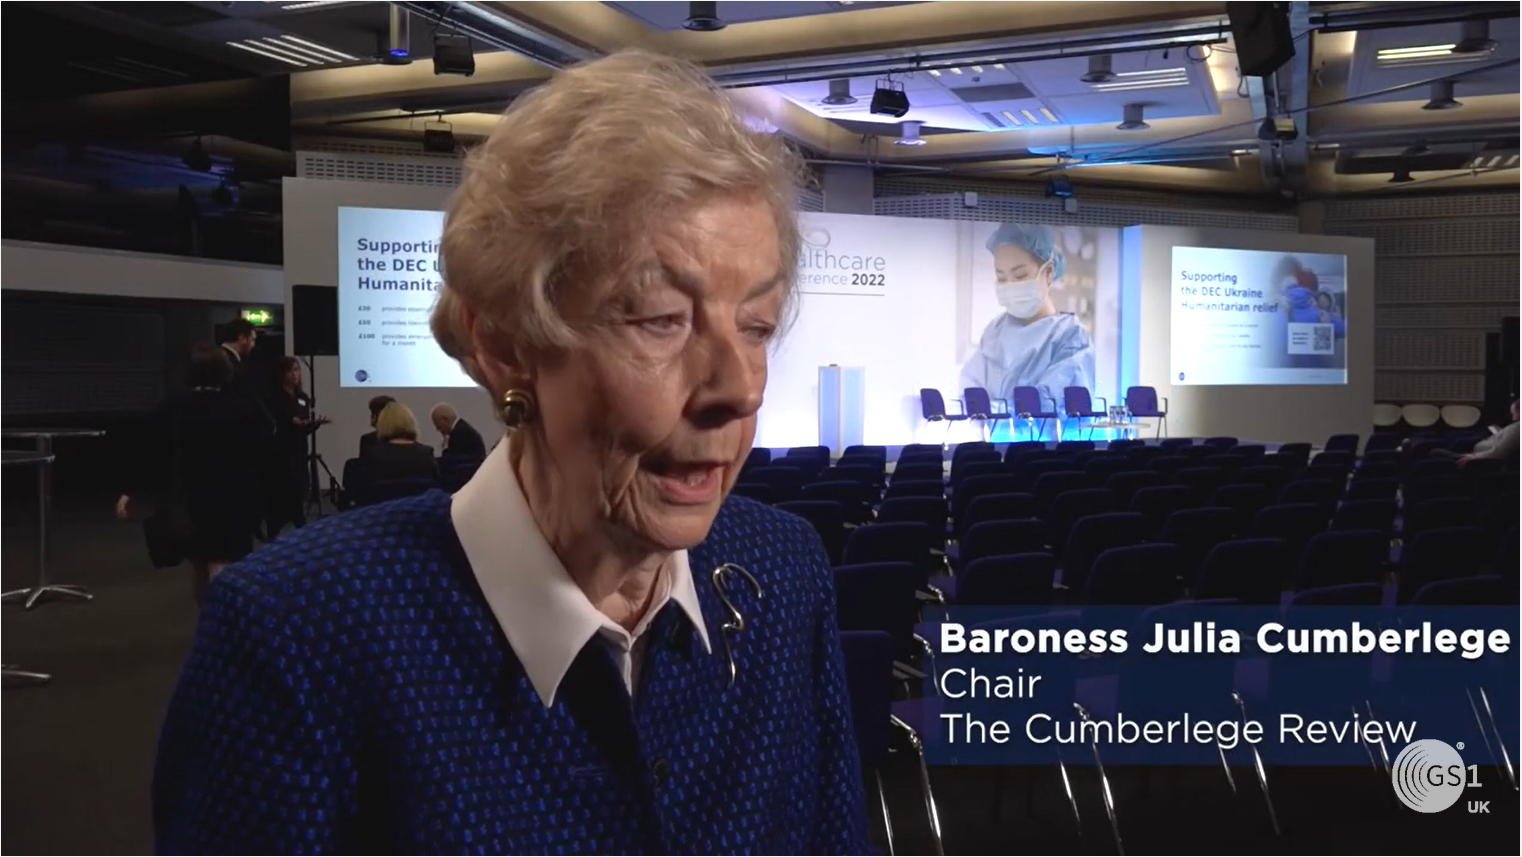 Baroness Julia Cumberlege being interviewed at a GS1 conference